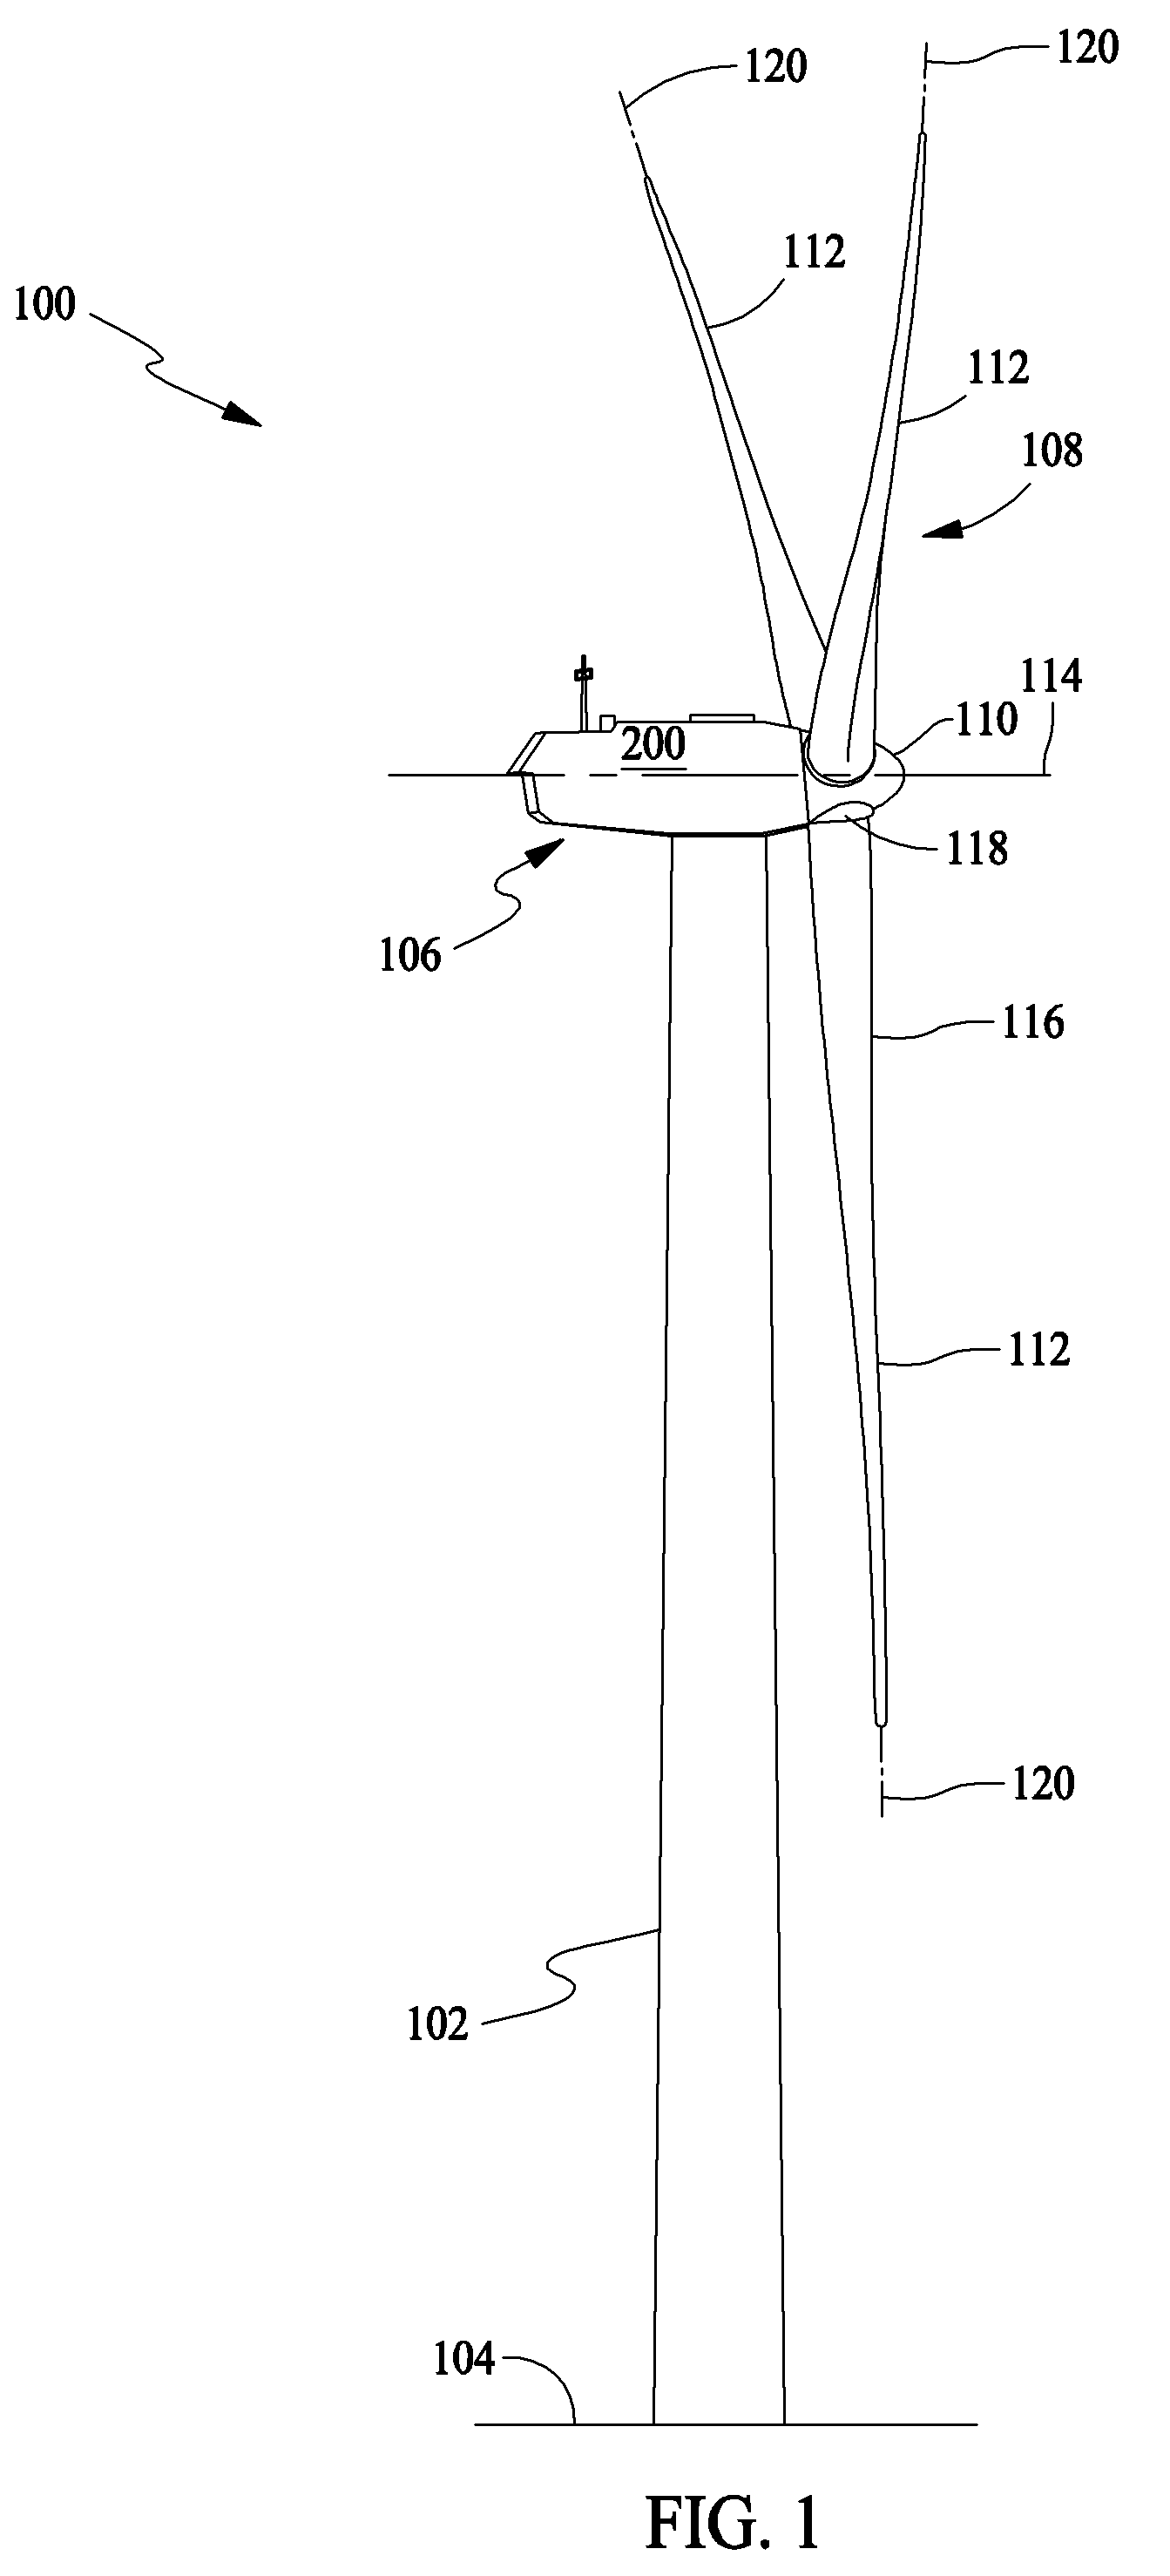 Methods and apparatus for assembling and operating monocoque rotary machines